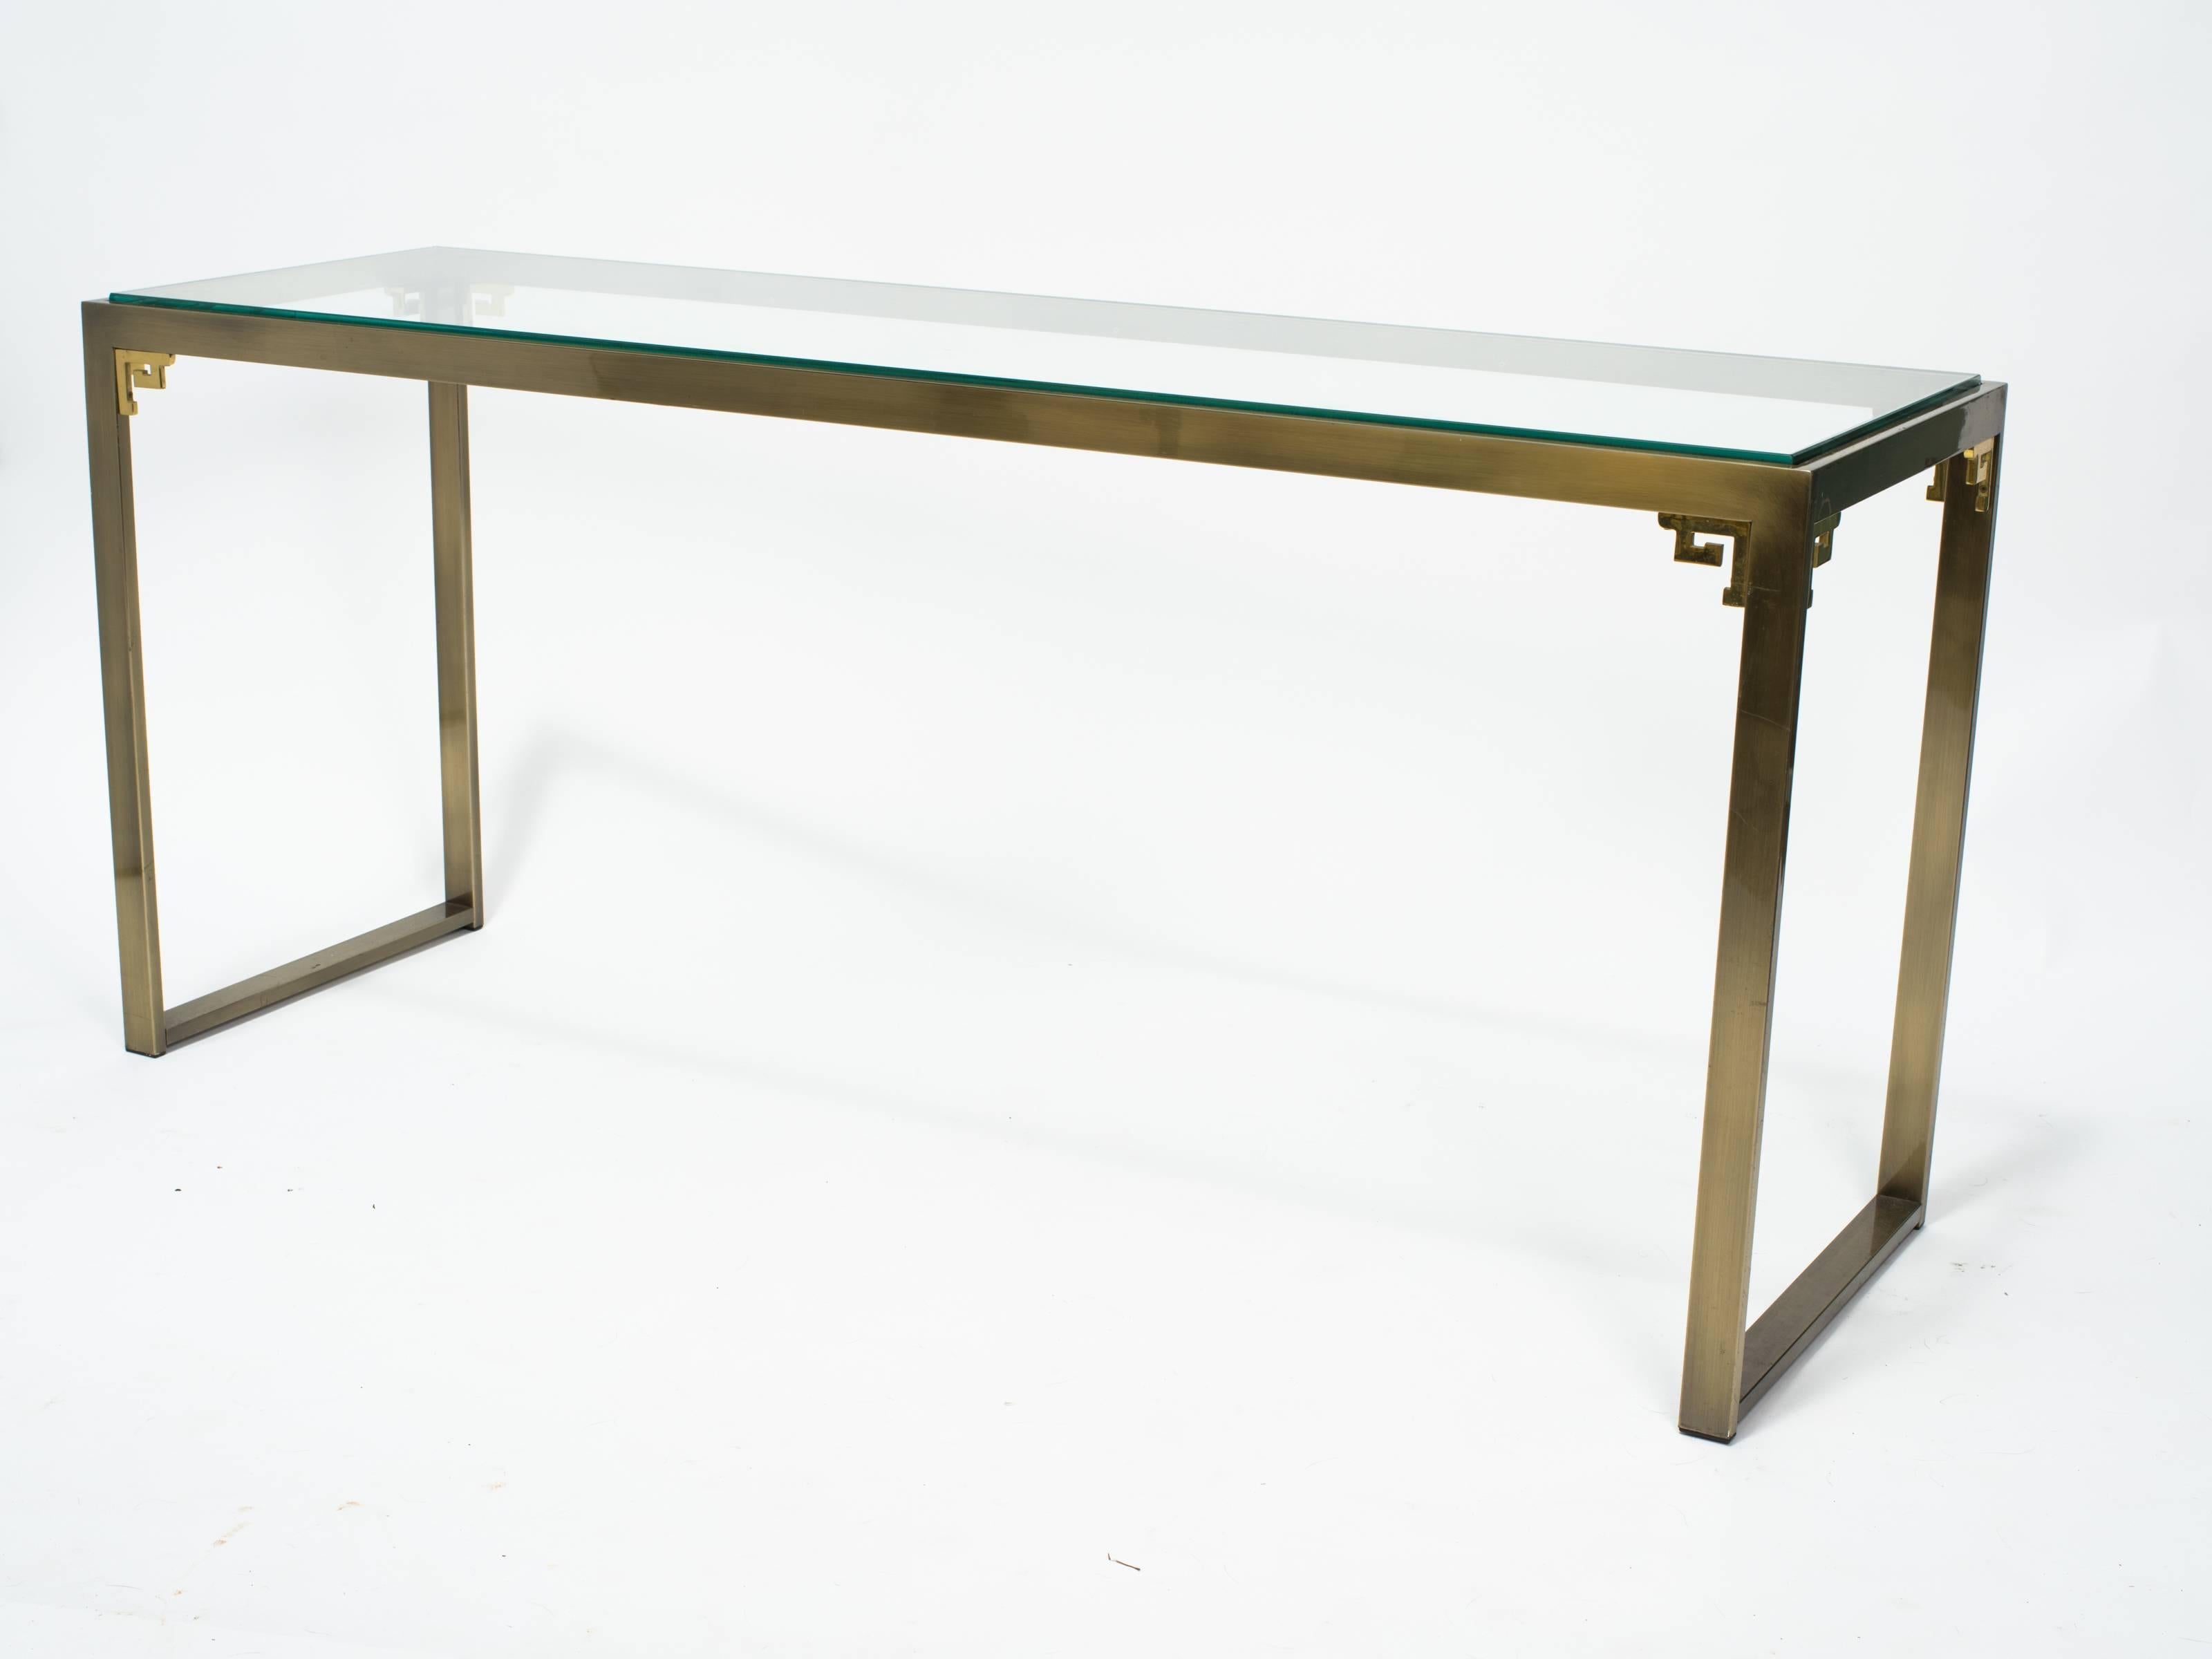 Greek key brass console table by Design Institute of America.